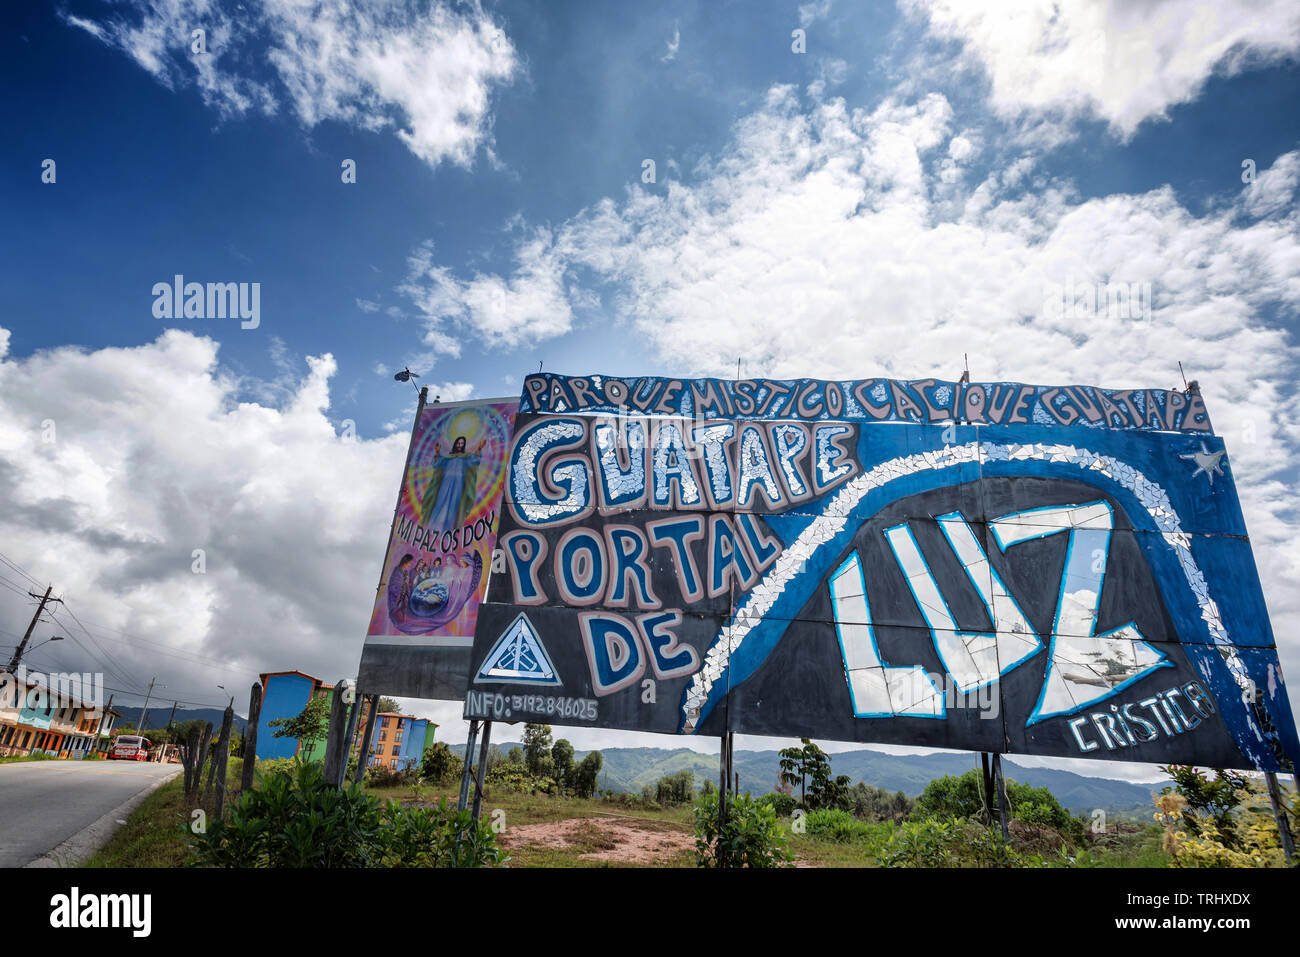 GUATAPE, COLOMBIA - NOV 10: The welcome sign to the small city of Gautape, Colombia on November 10, 2017. The city is located 90 minutes outside of Co Stock Photo